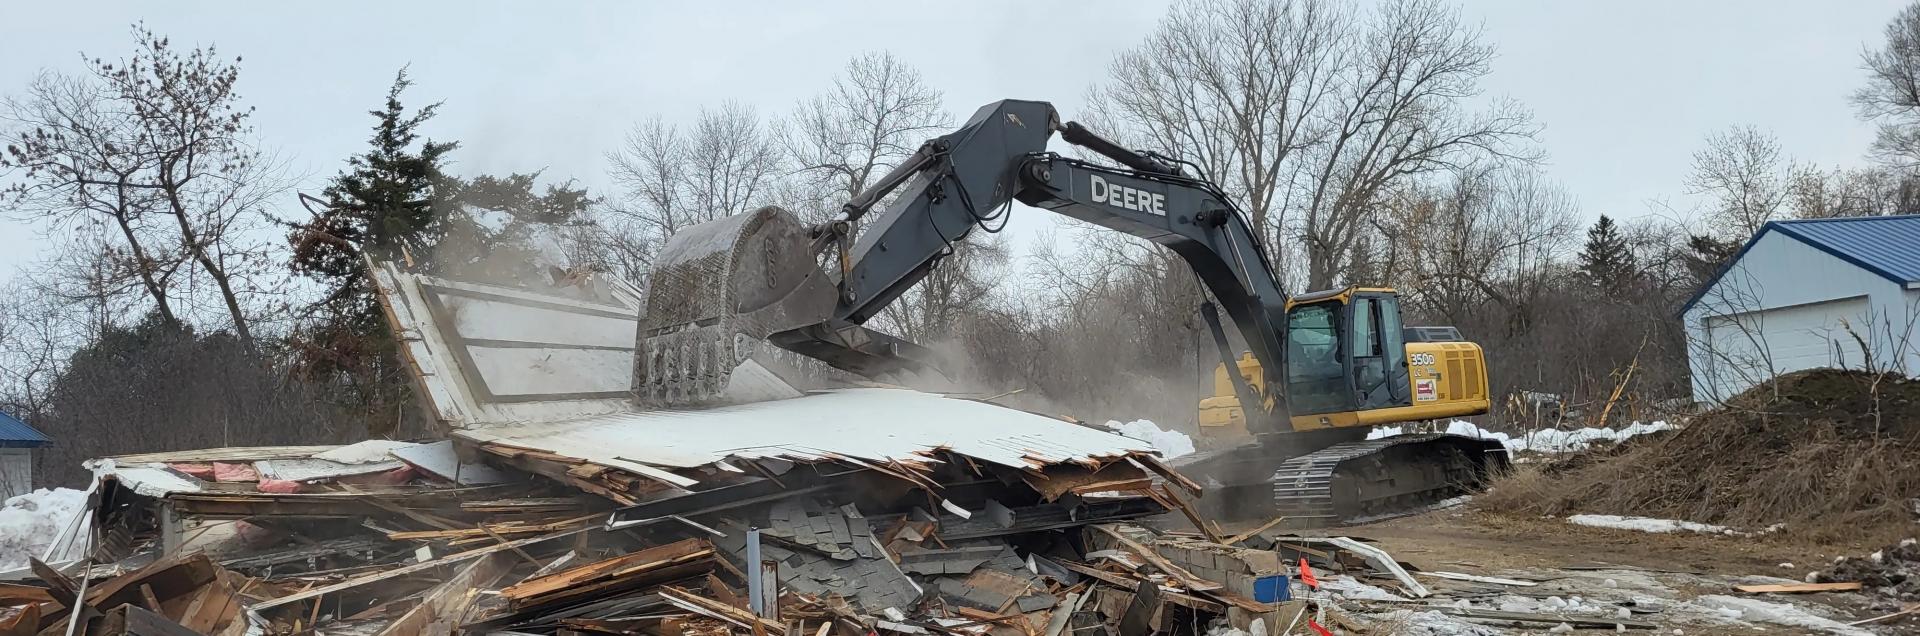 When you're in need of demolition services that are fast and effective, we're on it!